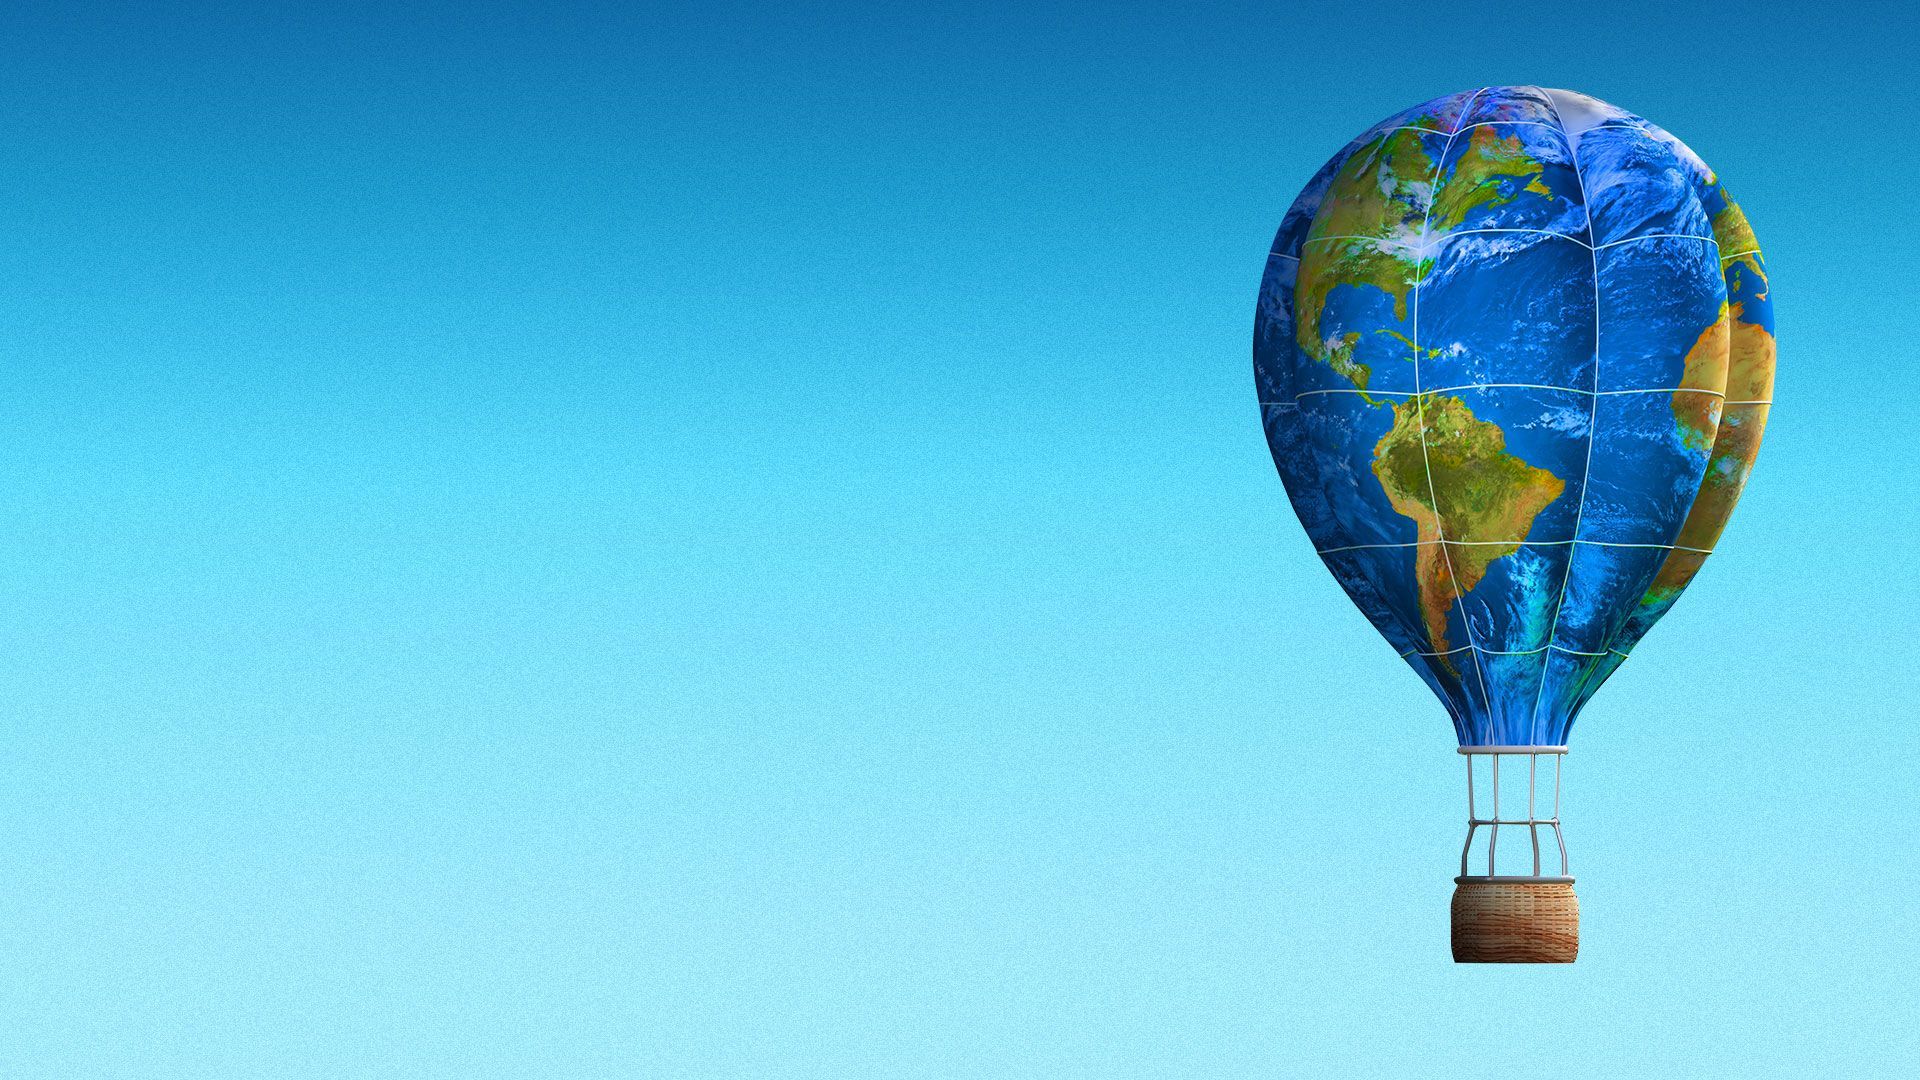 Illustration of a hot air balloon with the Earth as the balloon portion. 